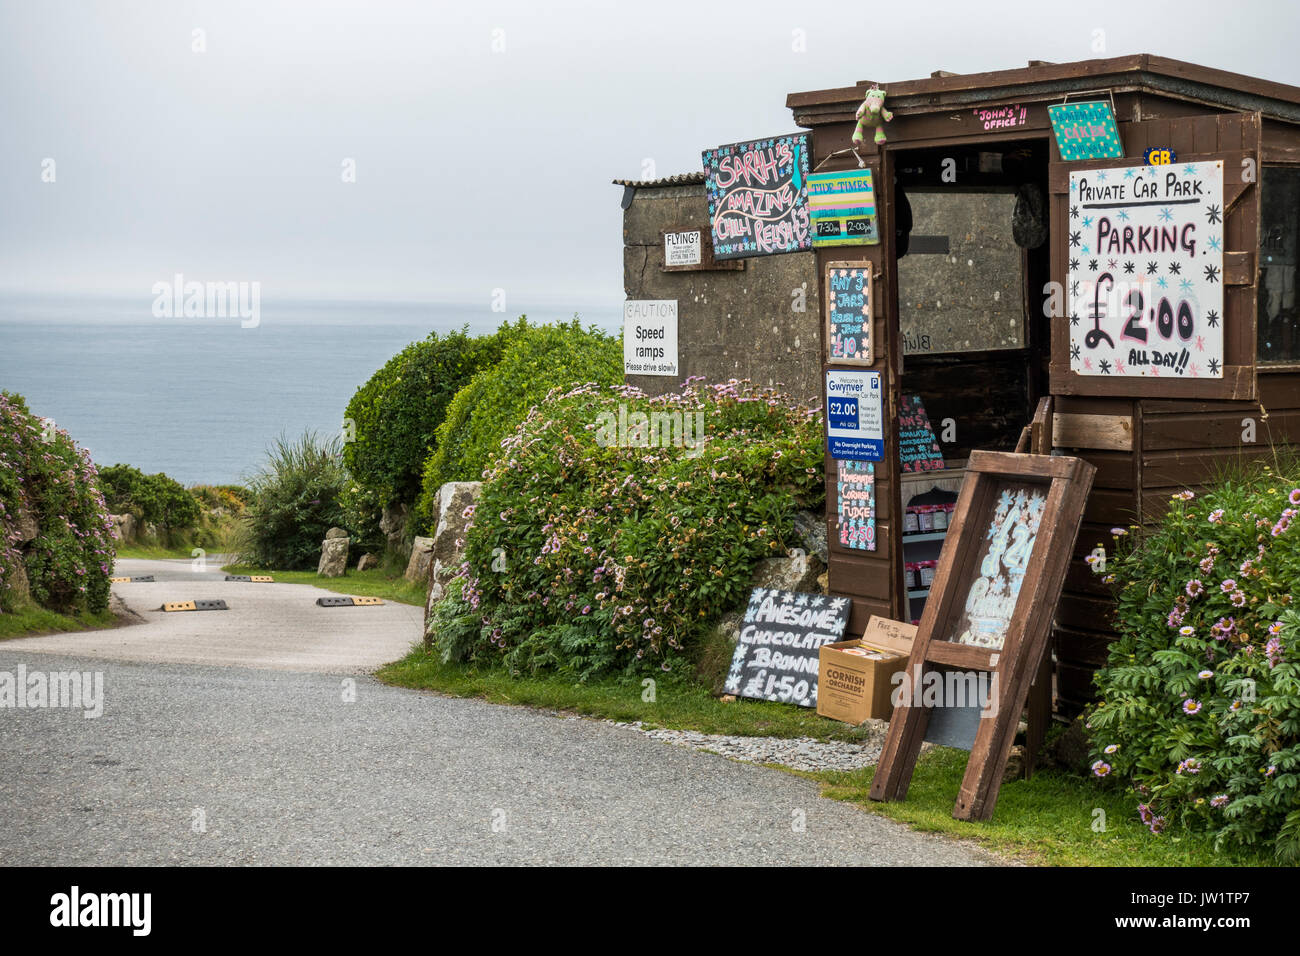 Shed adorned with various items, serving as a collection point for a private car park near to Gwynver Beach, near Penzance, Cornwall, England, UK. Stock Photo